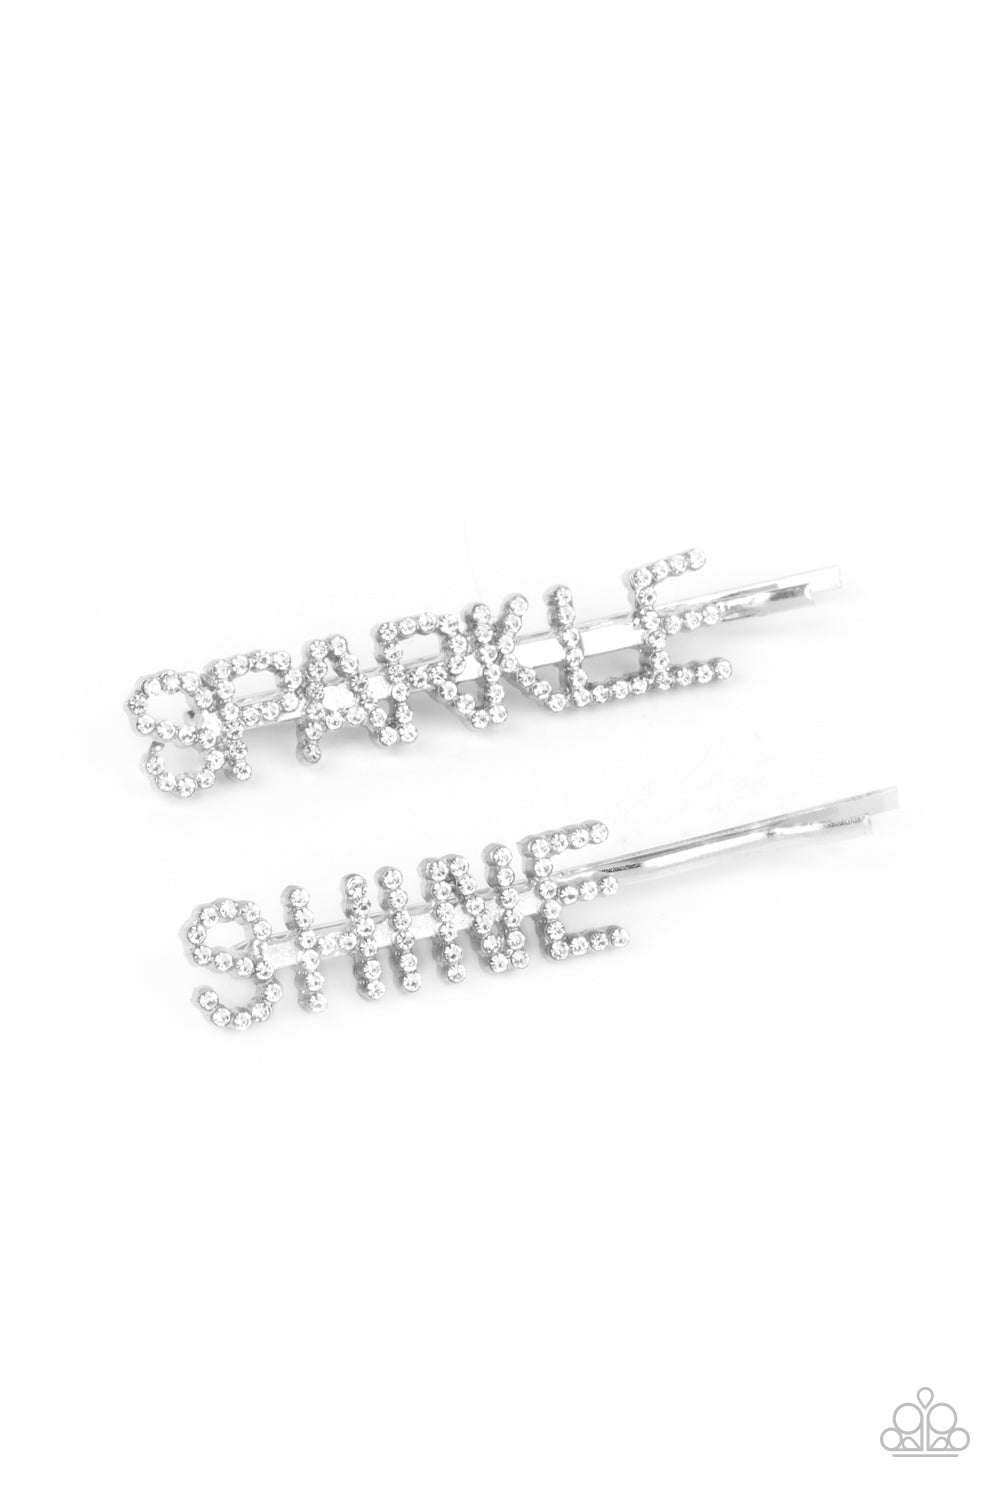 Glassy white rhinestones spell out "Sparkle," and "Shine," across the fronts of two silver bobby pins, creating a sparkly duo. Bling on each hair clip, beautiful, bold and shiny.